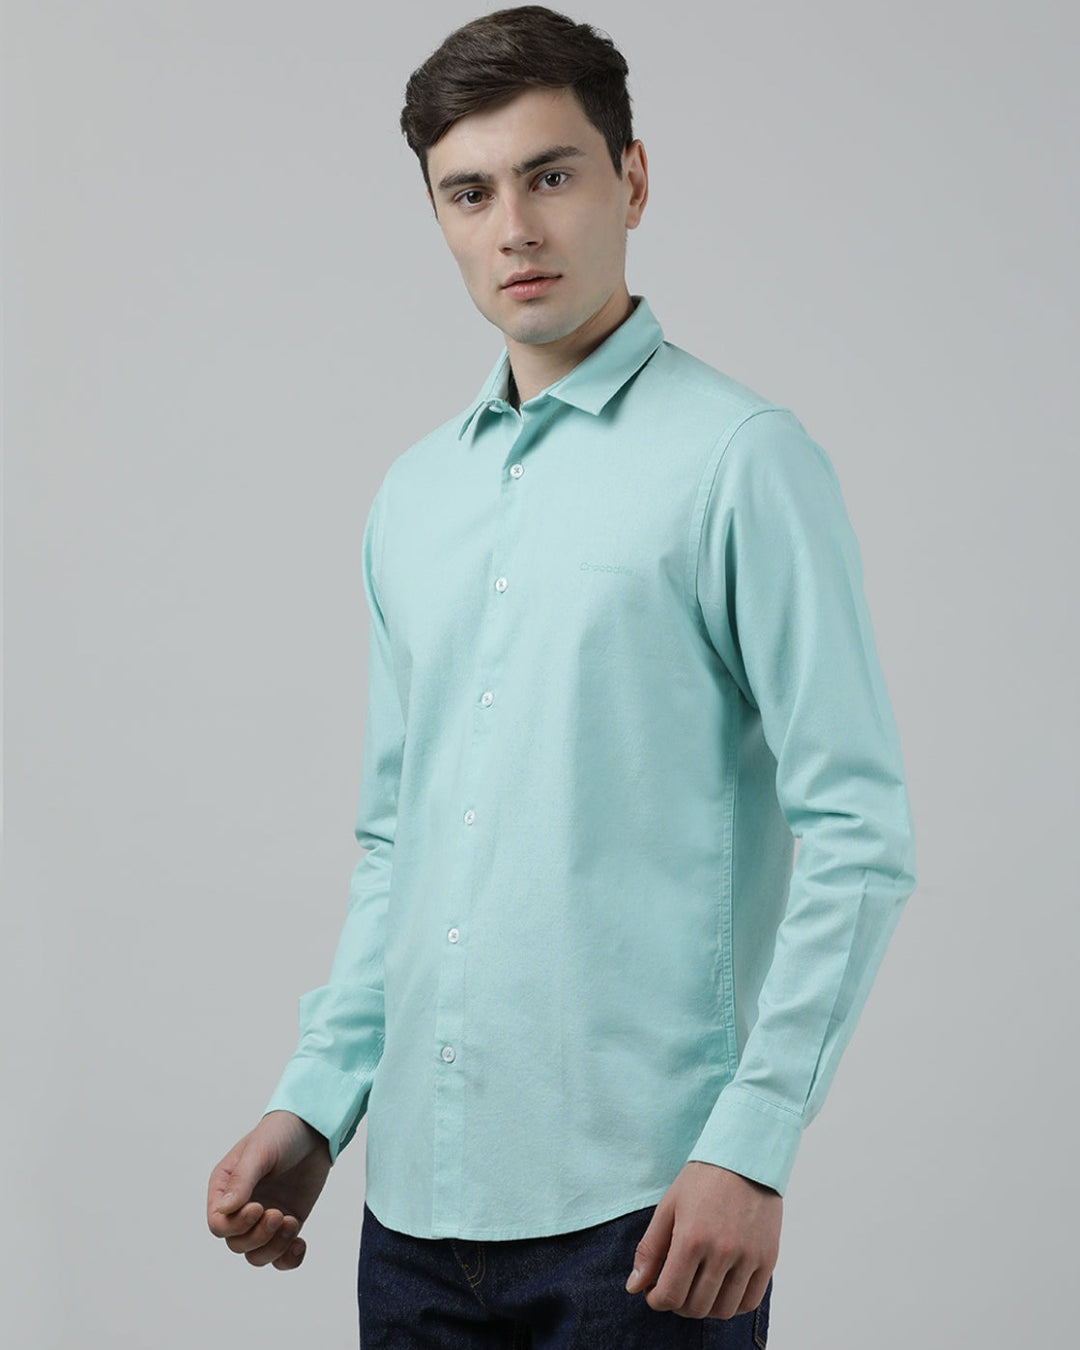 Crocodile Casual Full Sleeve Slim Fit Printed Shirt Green with Collar for Men